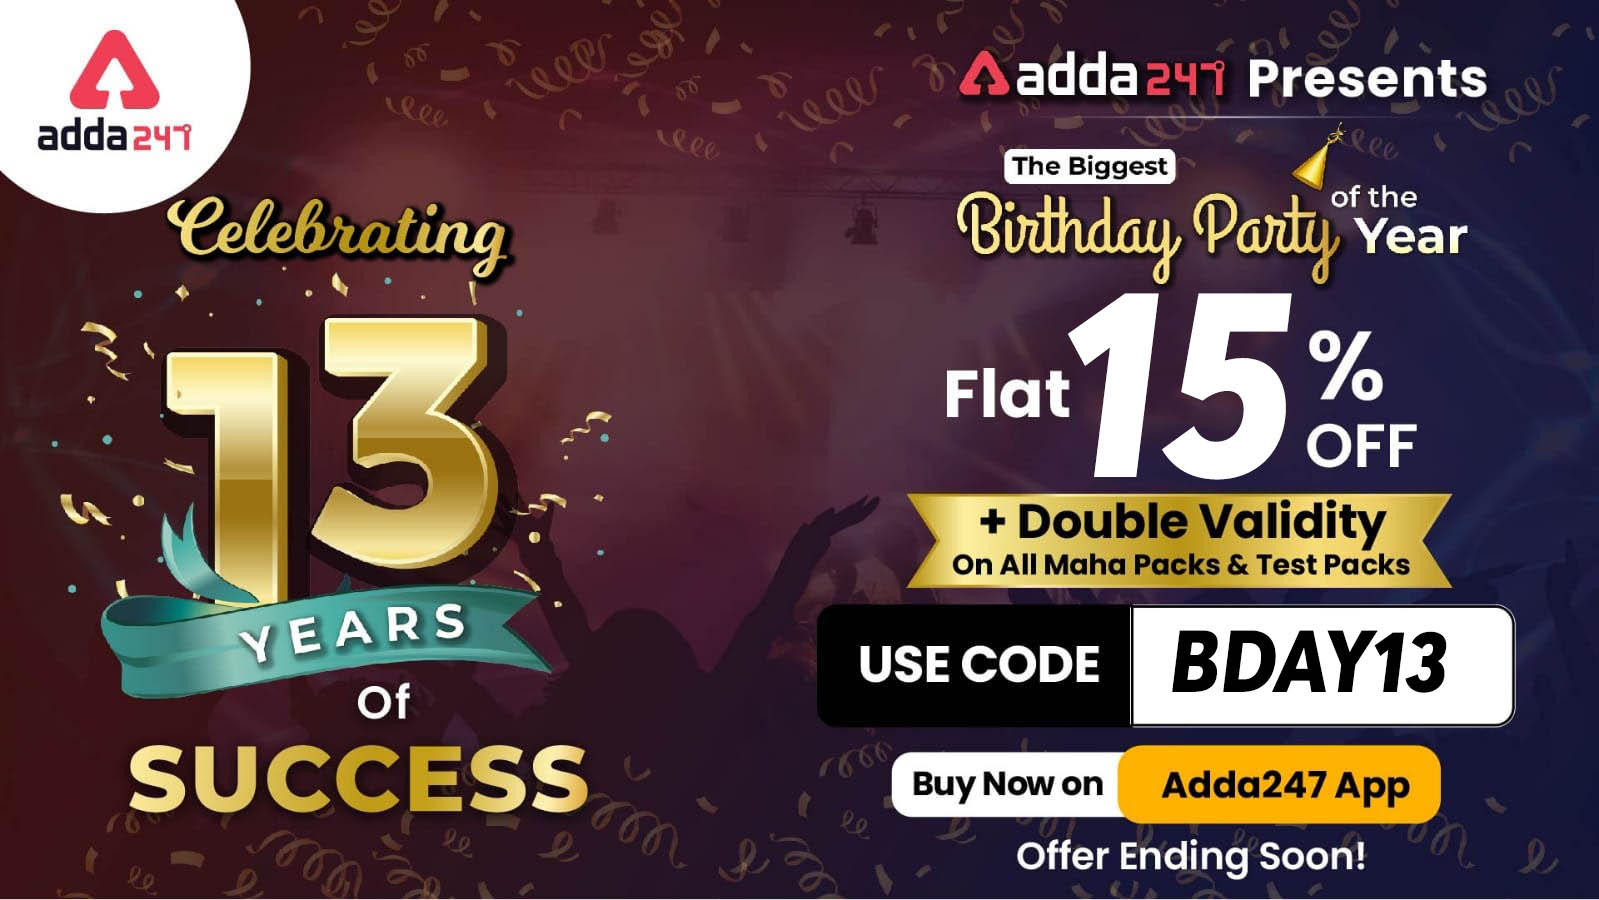 Adda247 Birthday Party Offer: Celebrating 13 years of Success_30.1